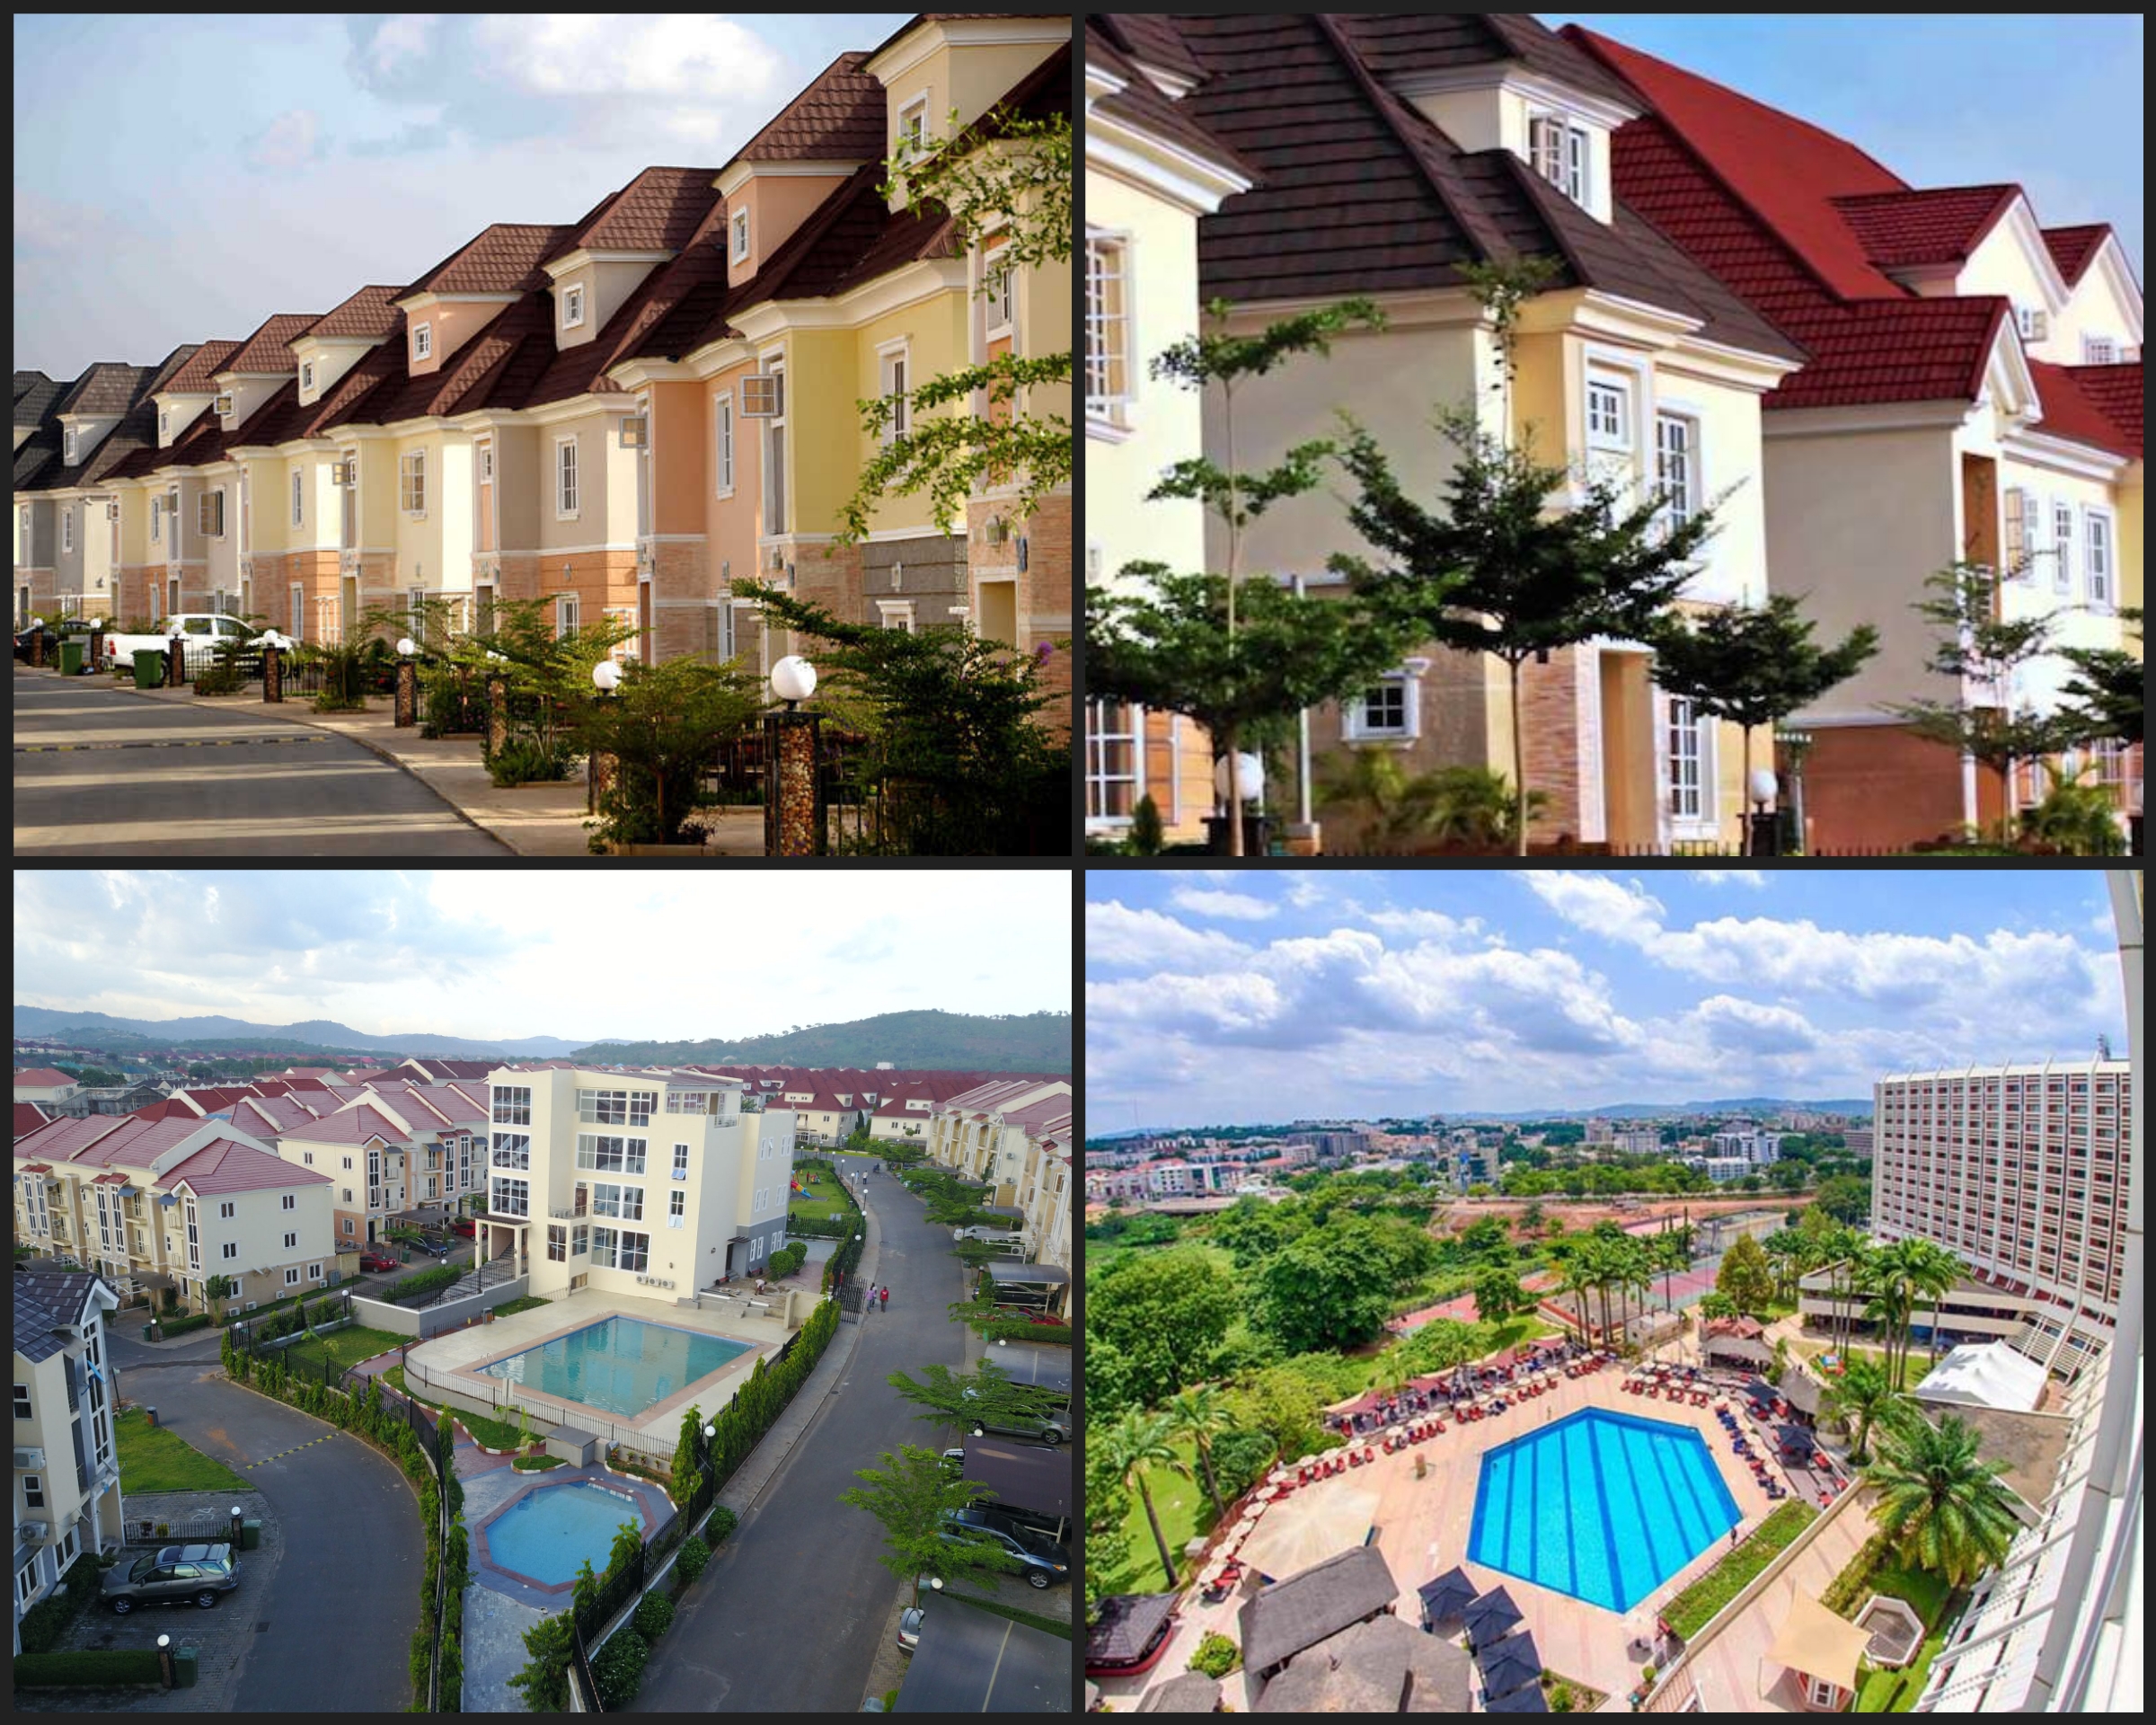 Top 10 Most Beautiful Residential Areas in Africa